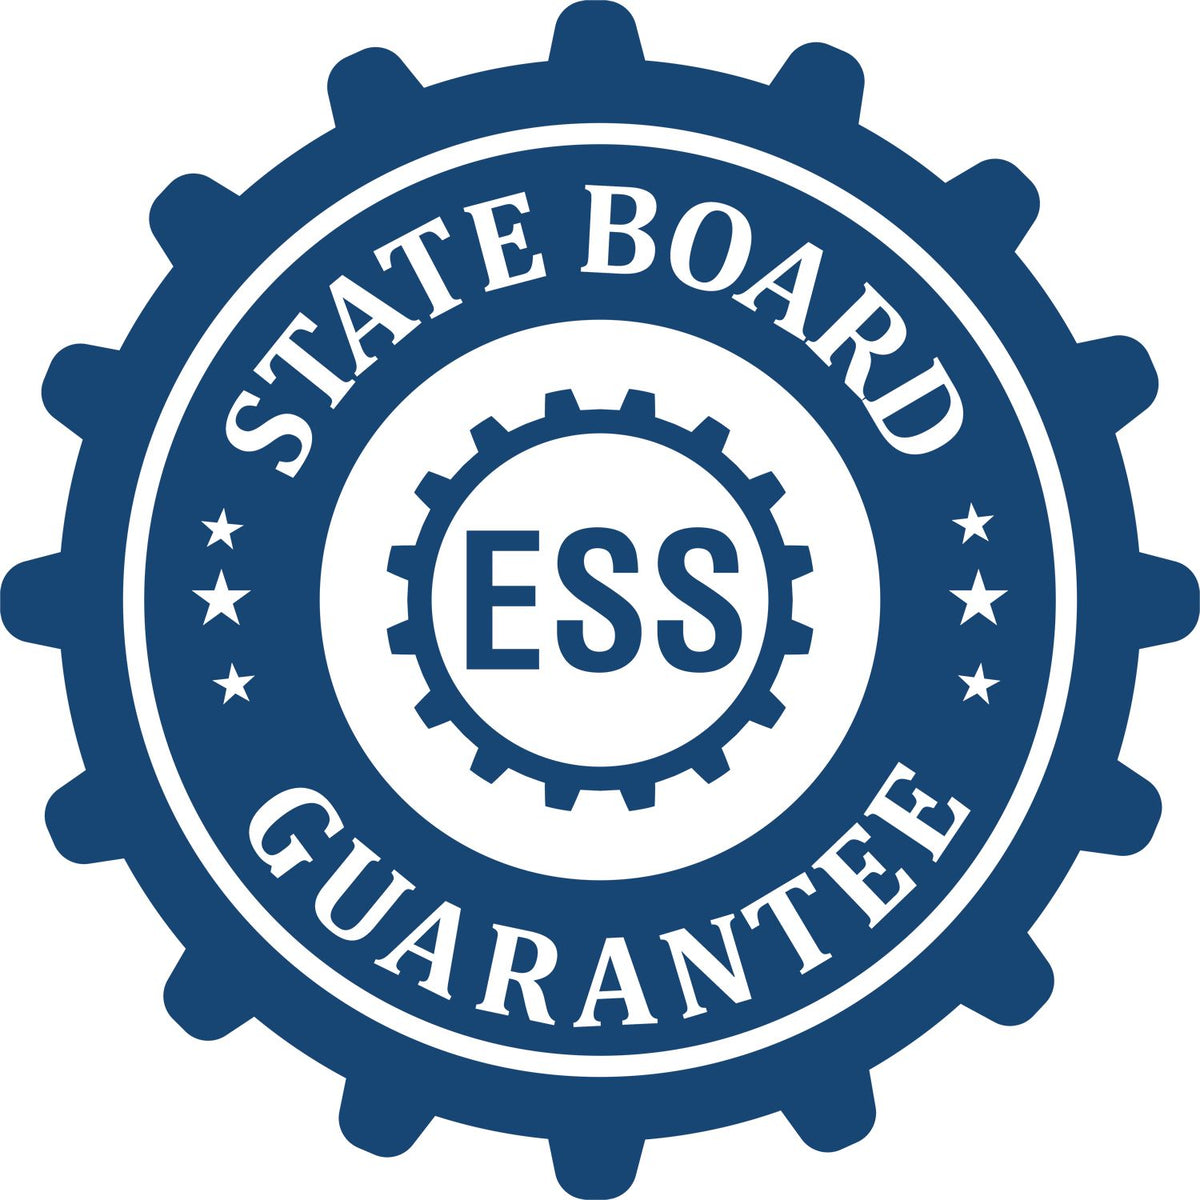 An emblem in a gear shape illustrating a state board guarantee for the Mississippi Desk Architect Embossing Seal product.